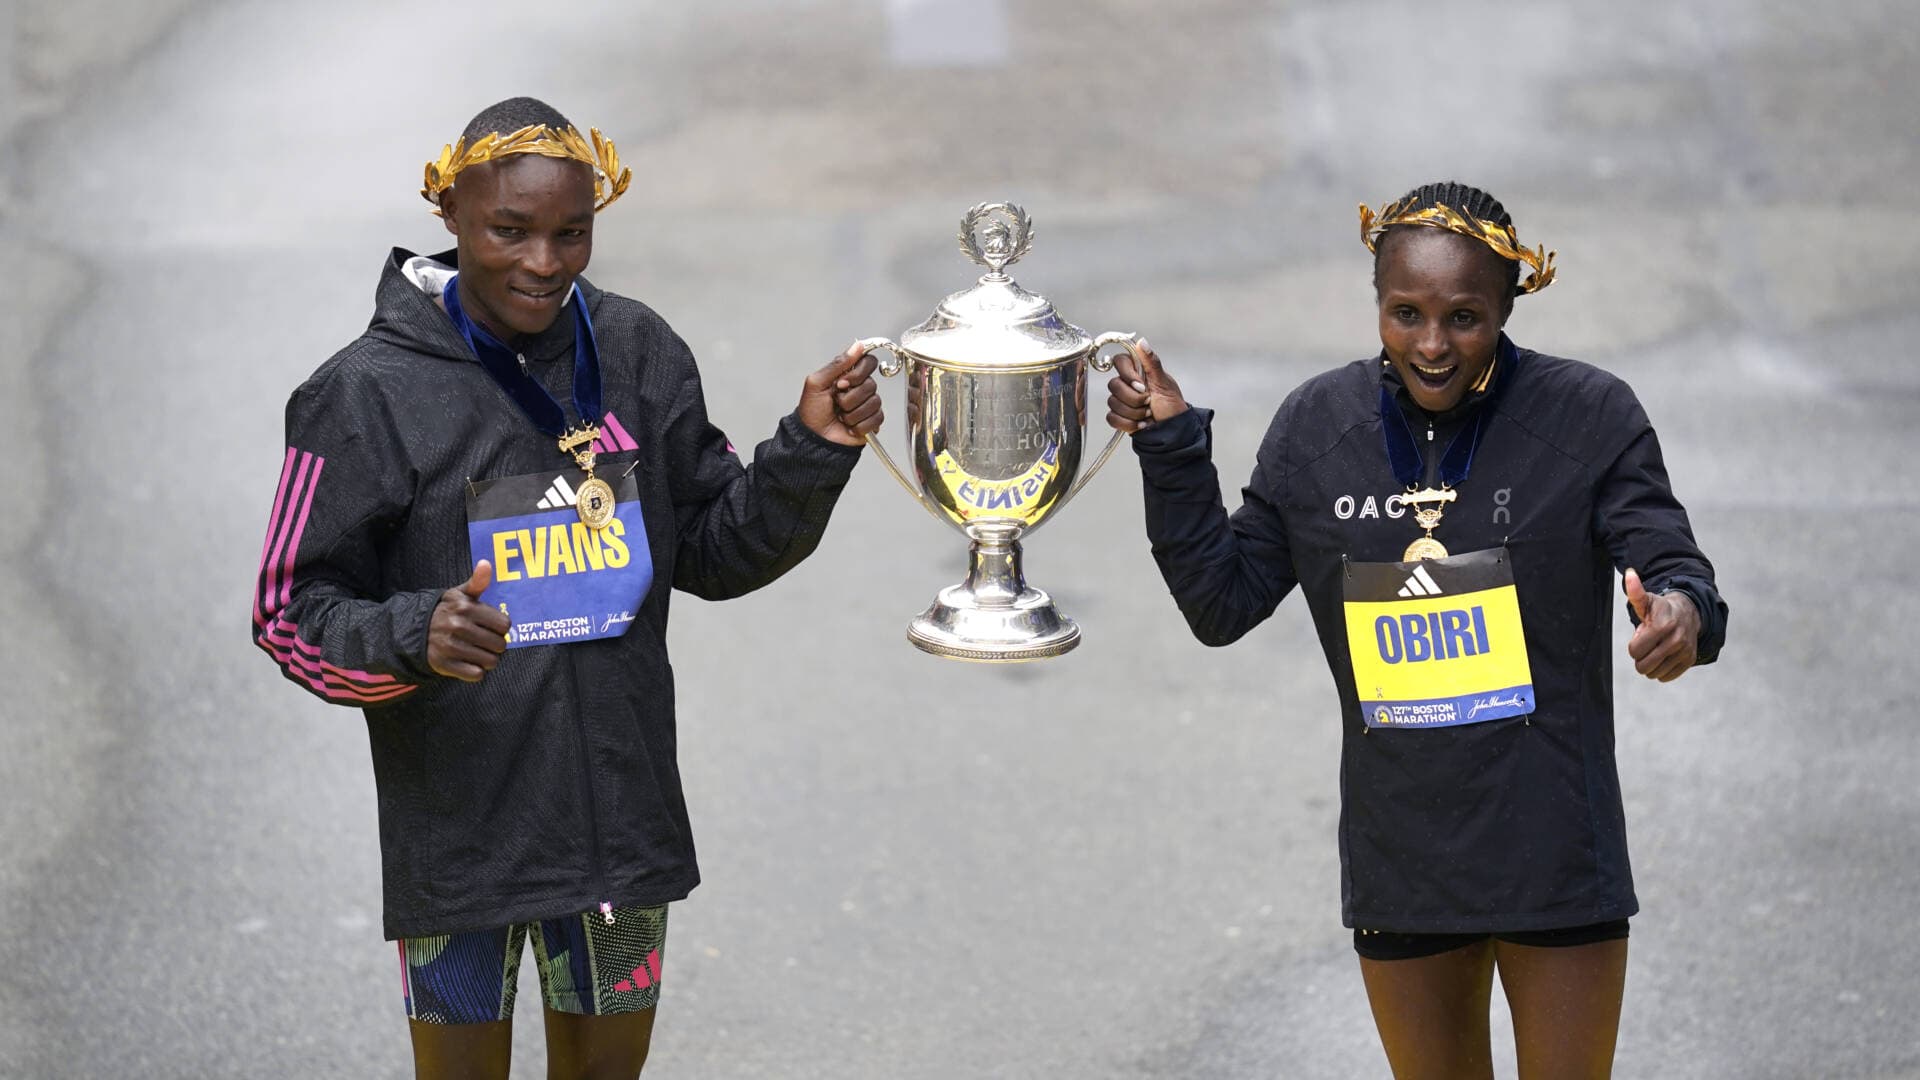 Evans Chebet, left, and Hellen Obiri, both of Kenya, pose on the finish line after winning the men's and women's division of the Boston Marathon on April 17 in Boston. (Charles Krupa/AP)